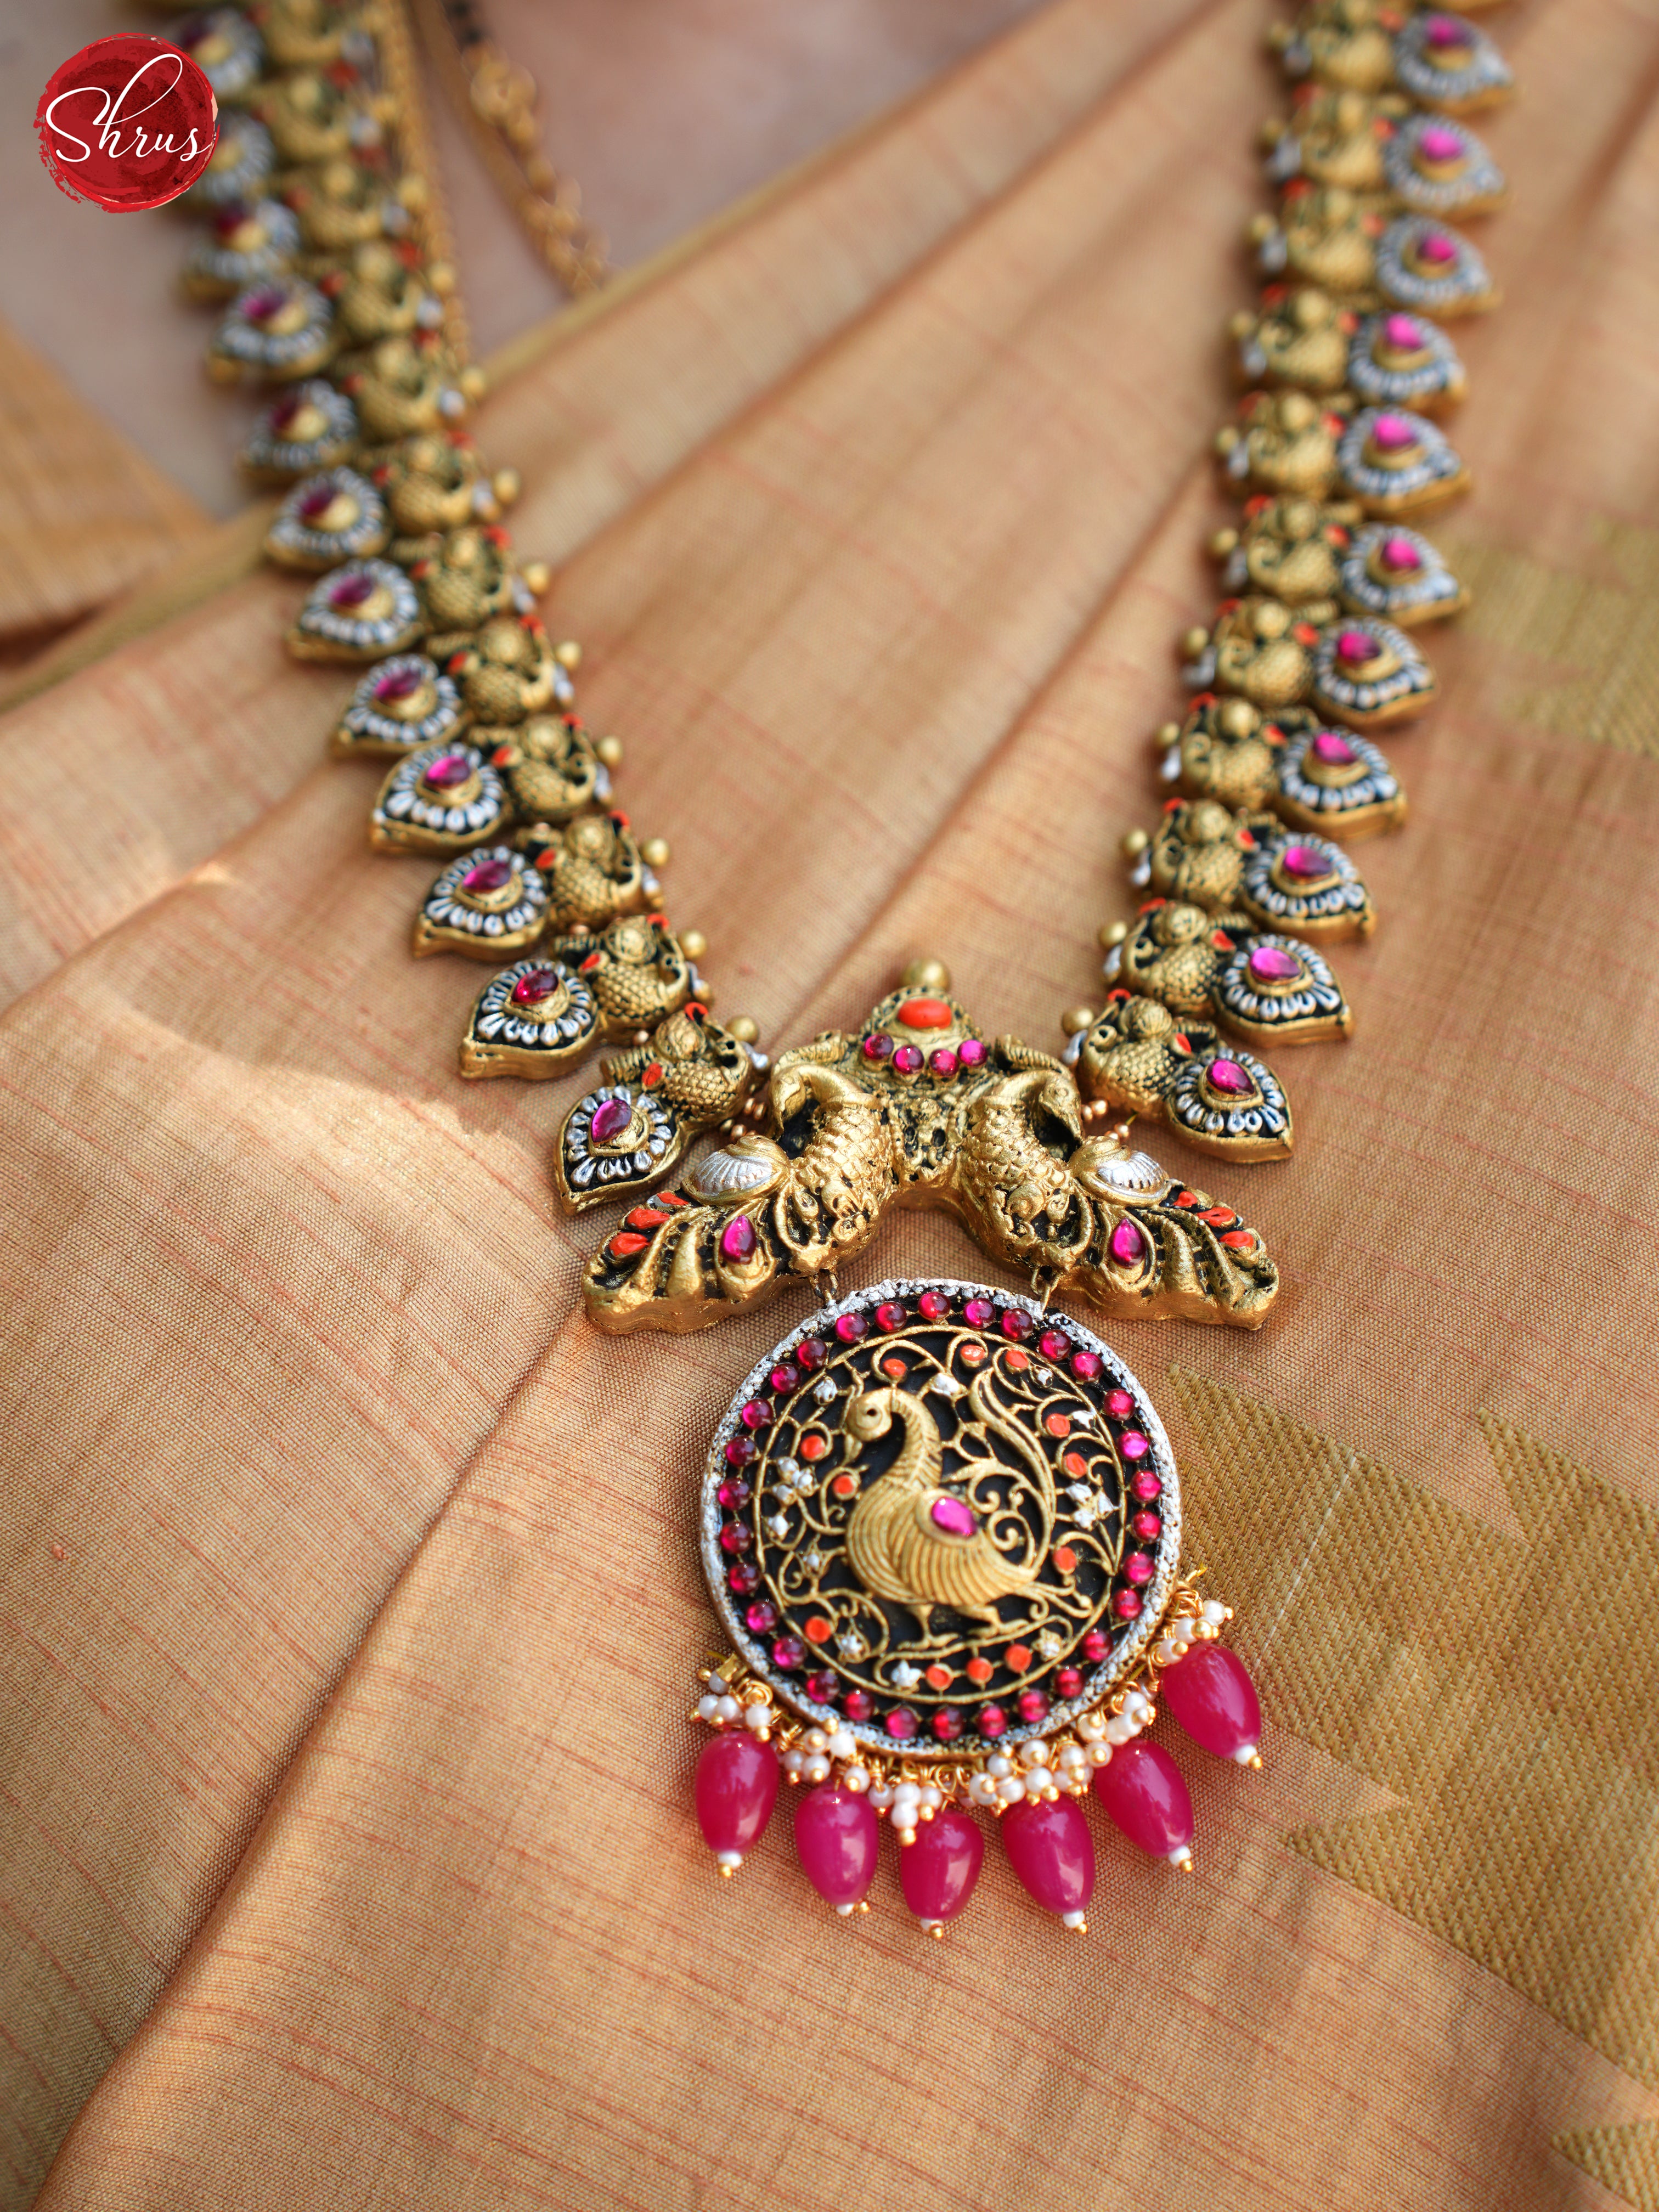 Manga Necklace with peacock pendant terracotta jewellery with jhumkas - Accessories - Shop on ShrusEternity.com